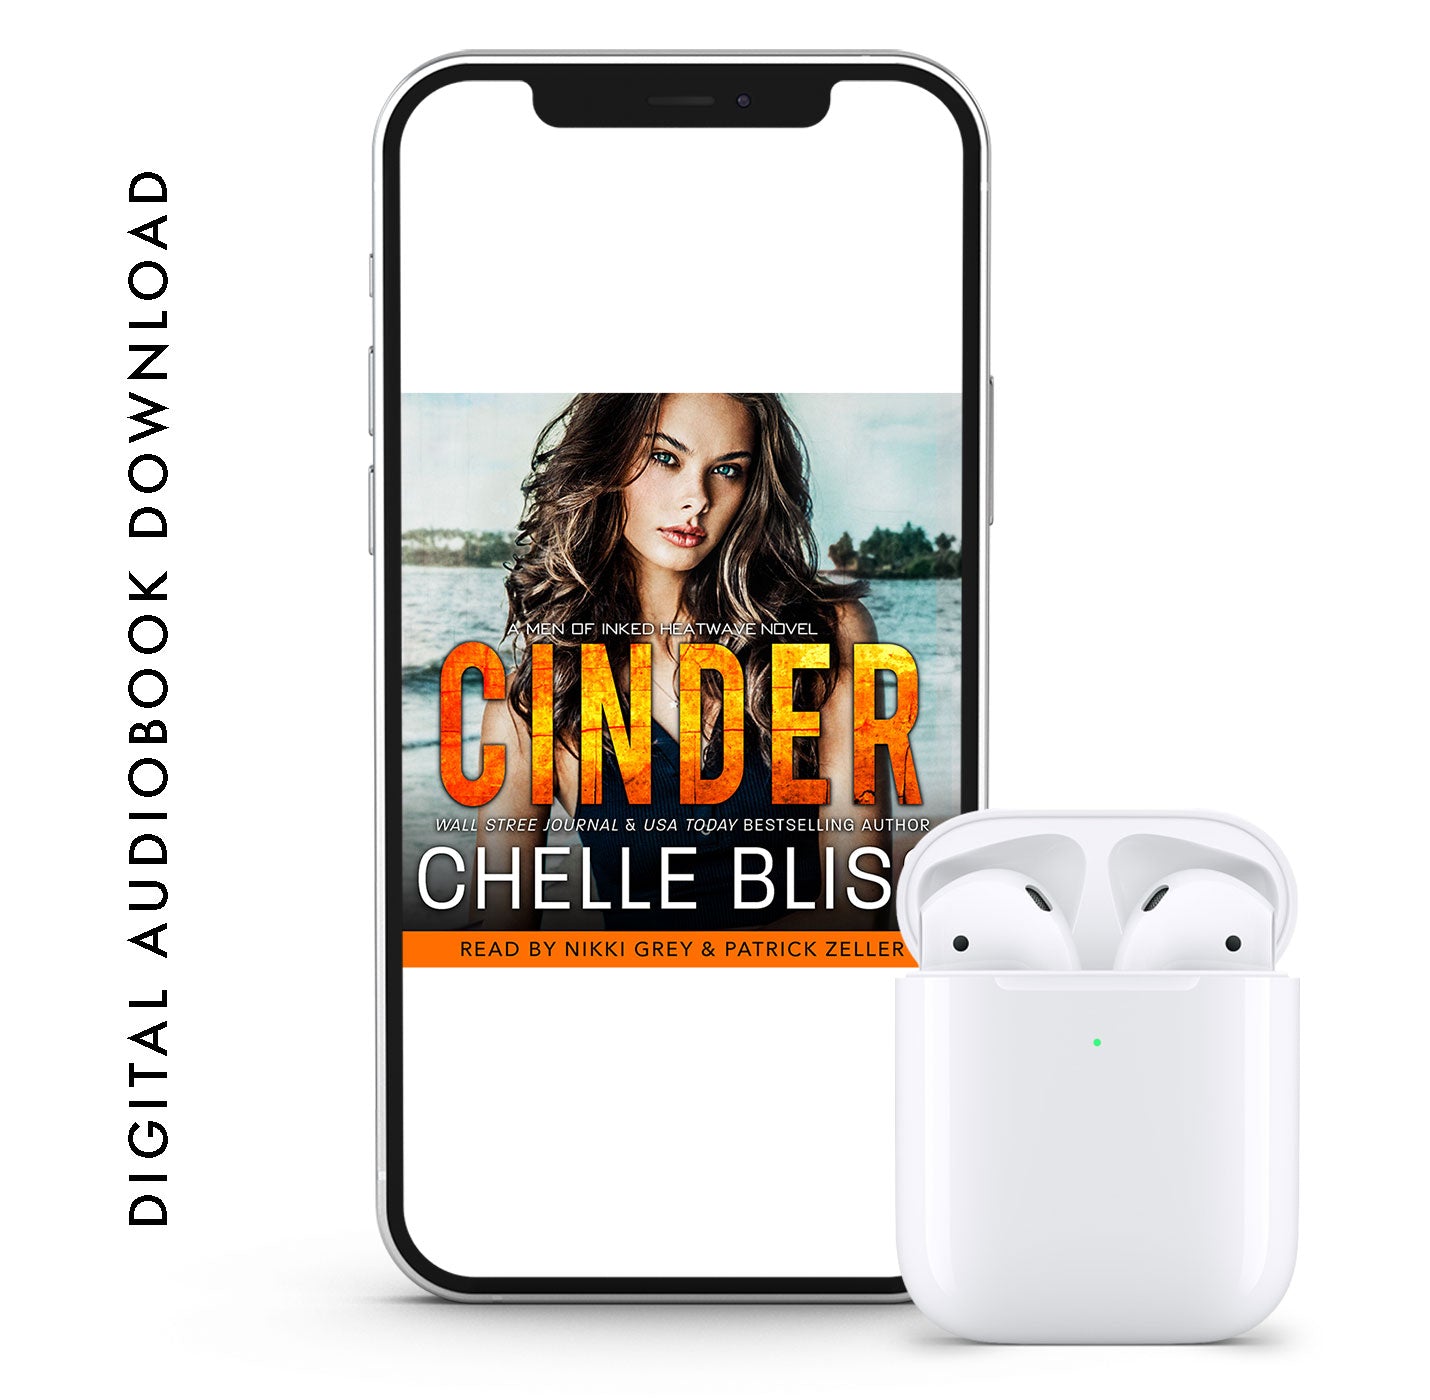 cinder audiobook by chelle bliss woman with ocean behind her 